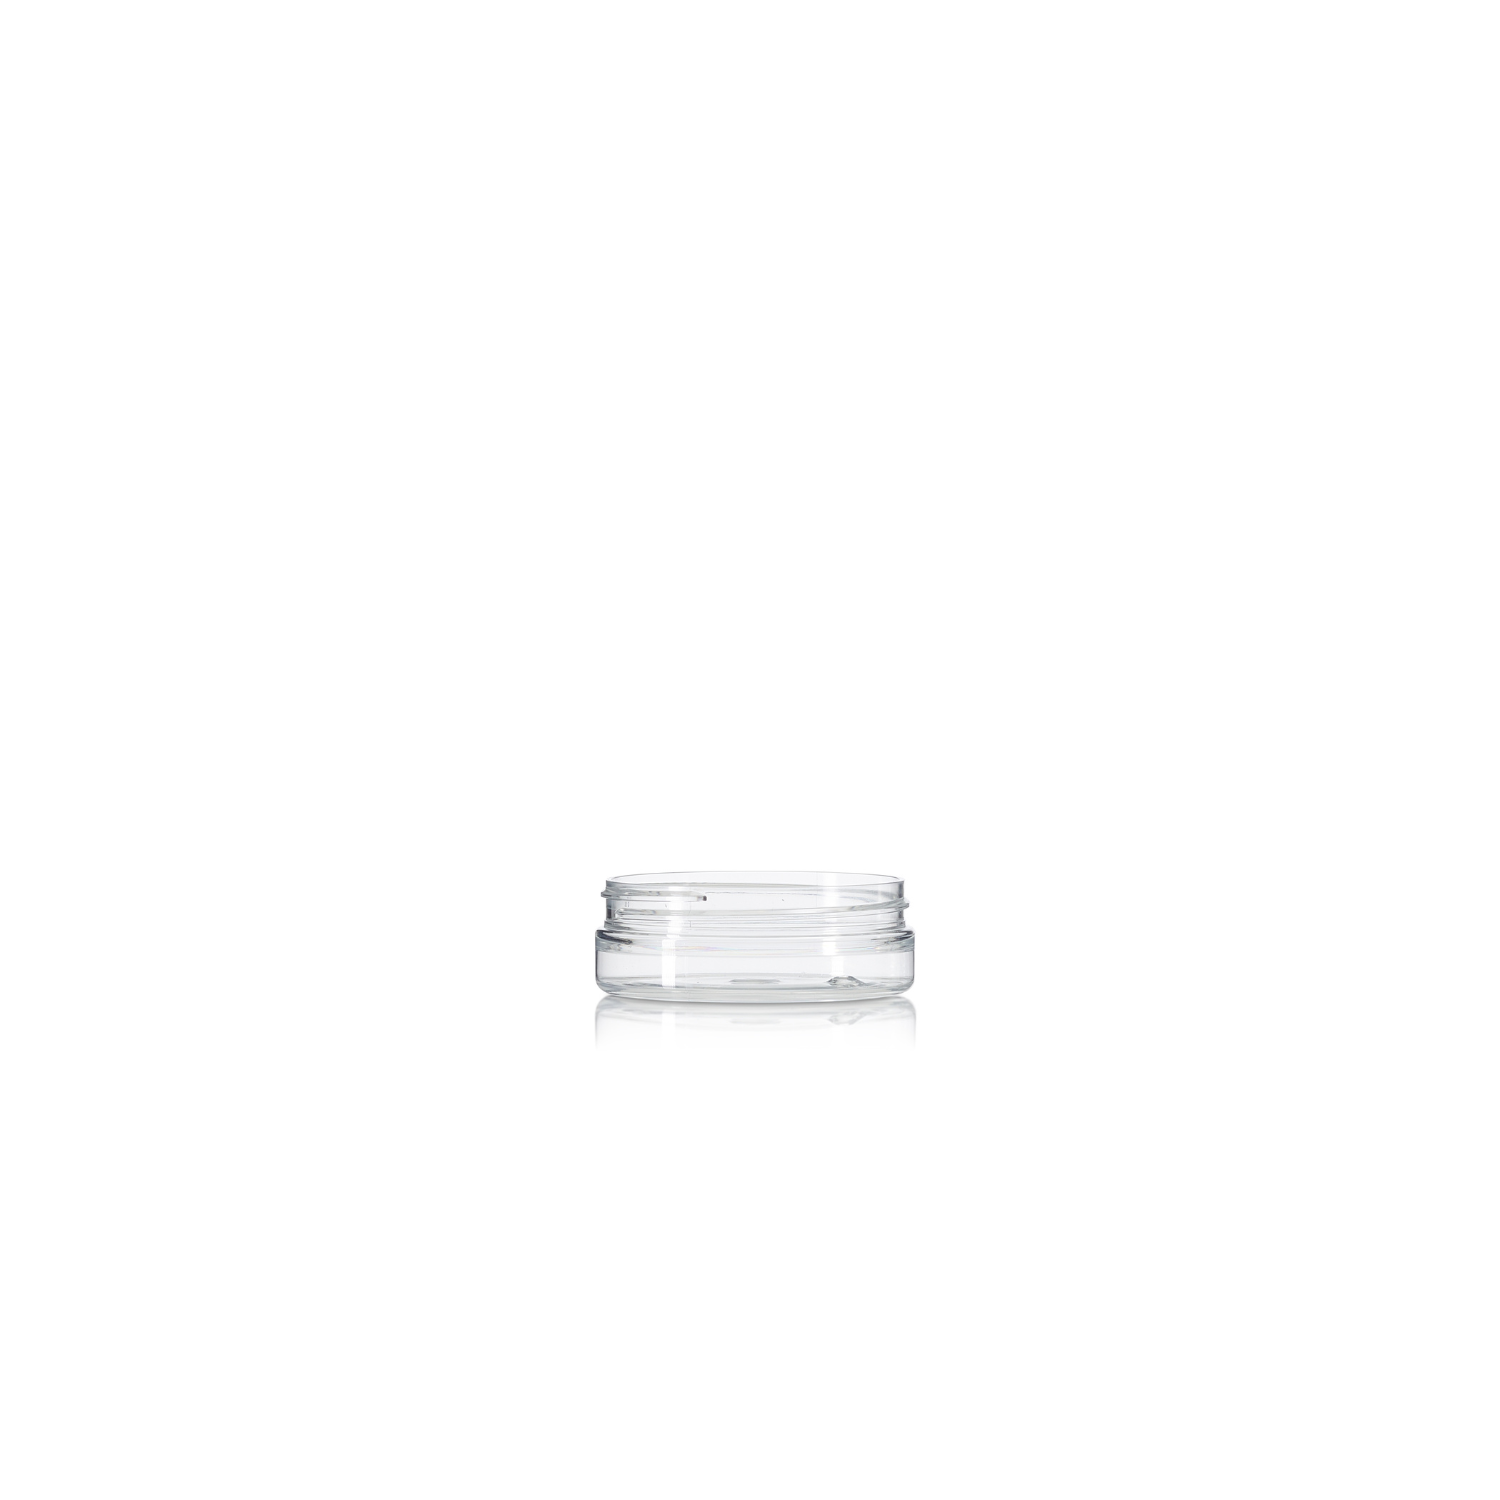 50ml Clear PET Straight-Sided Jar - 70/400 neck